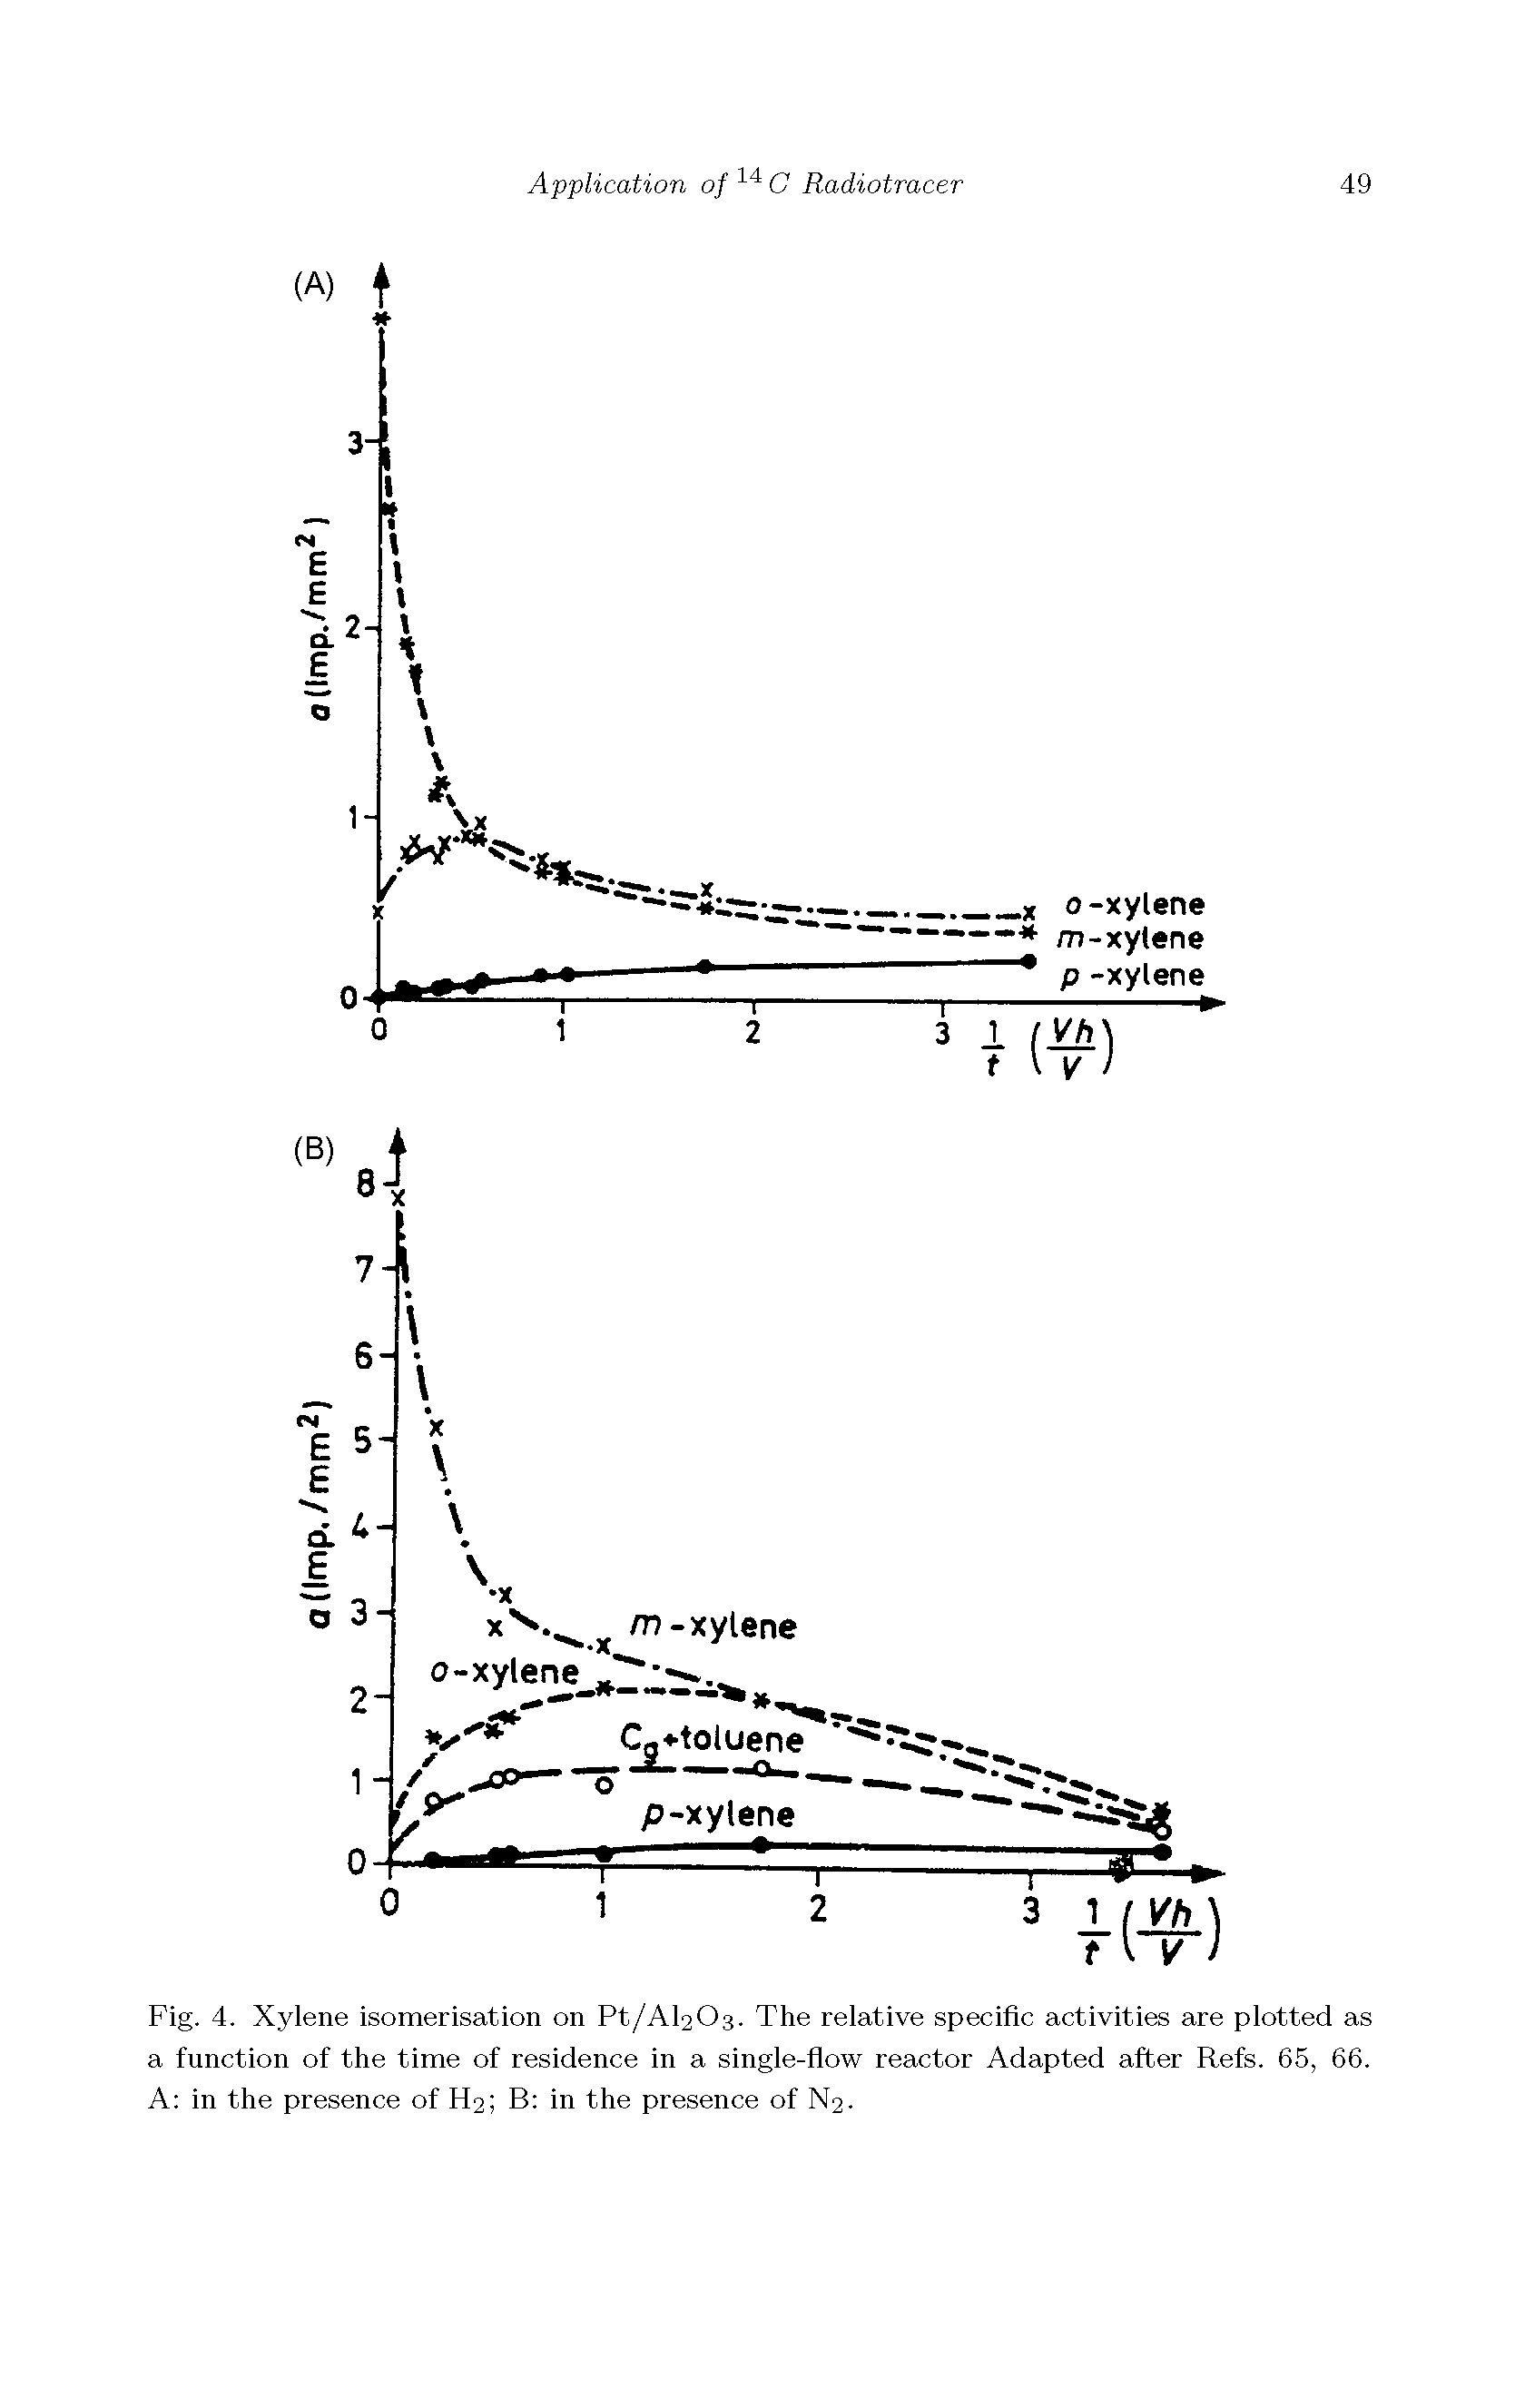 Fig. 4. Xylene isomerisation on Pt/Al203. The relative specific activities are plotted as a function of the time of residence in a single-flow reactor Adapted after Refs. 65, 66. A in the presence of H2 B in the presence of N2.